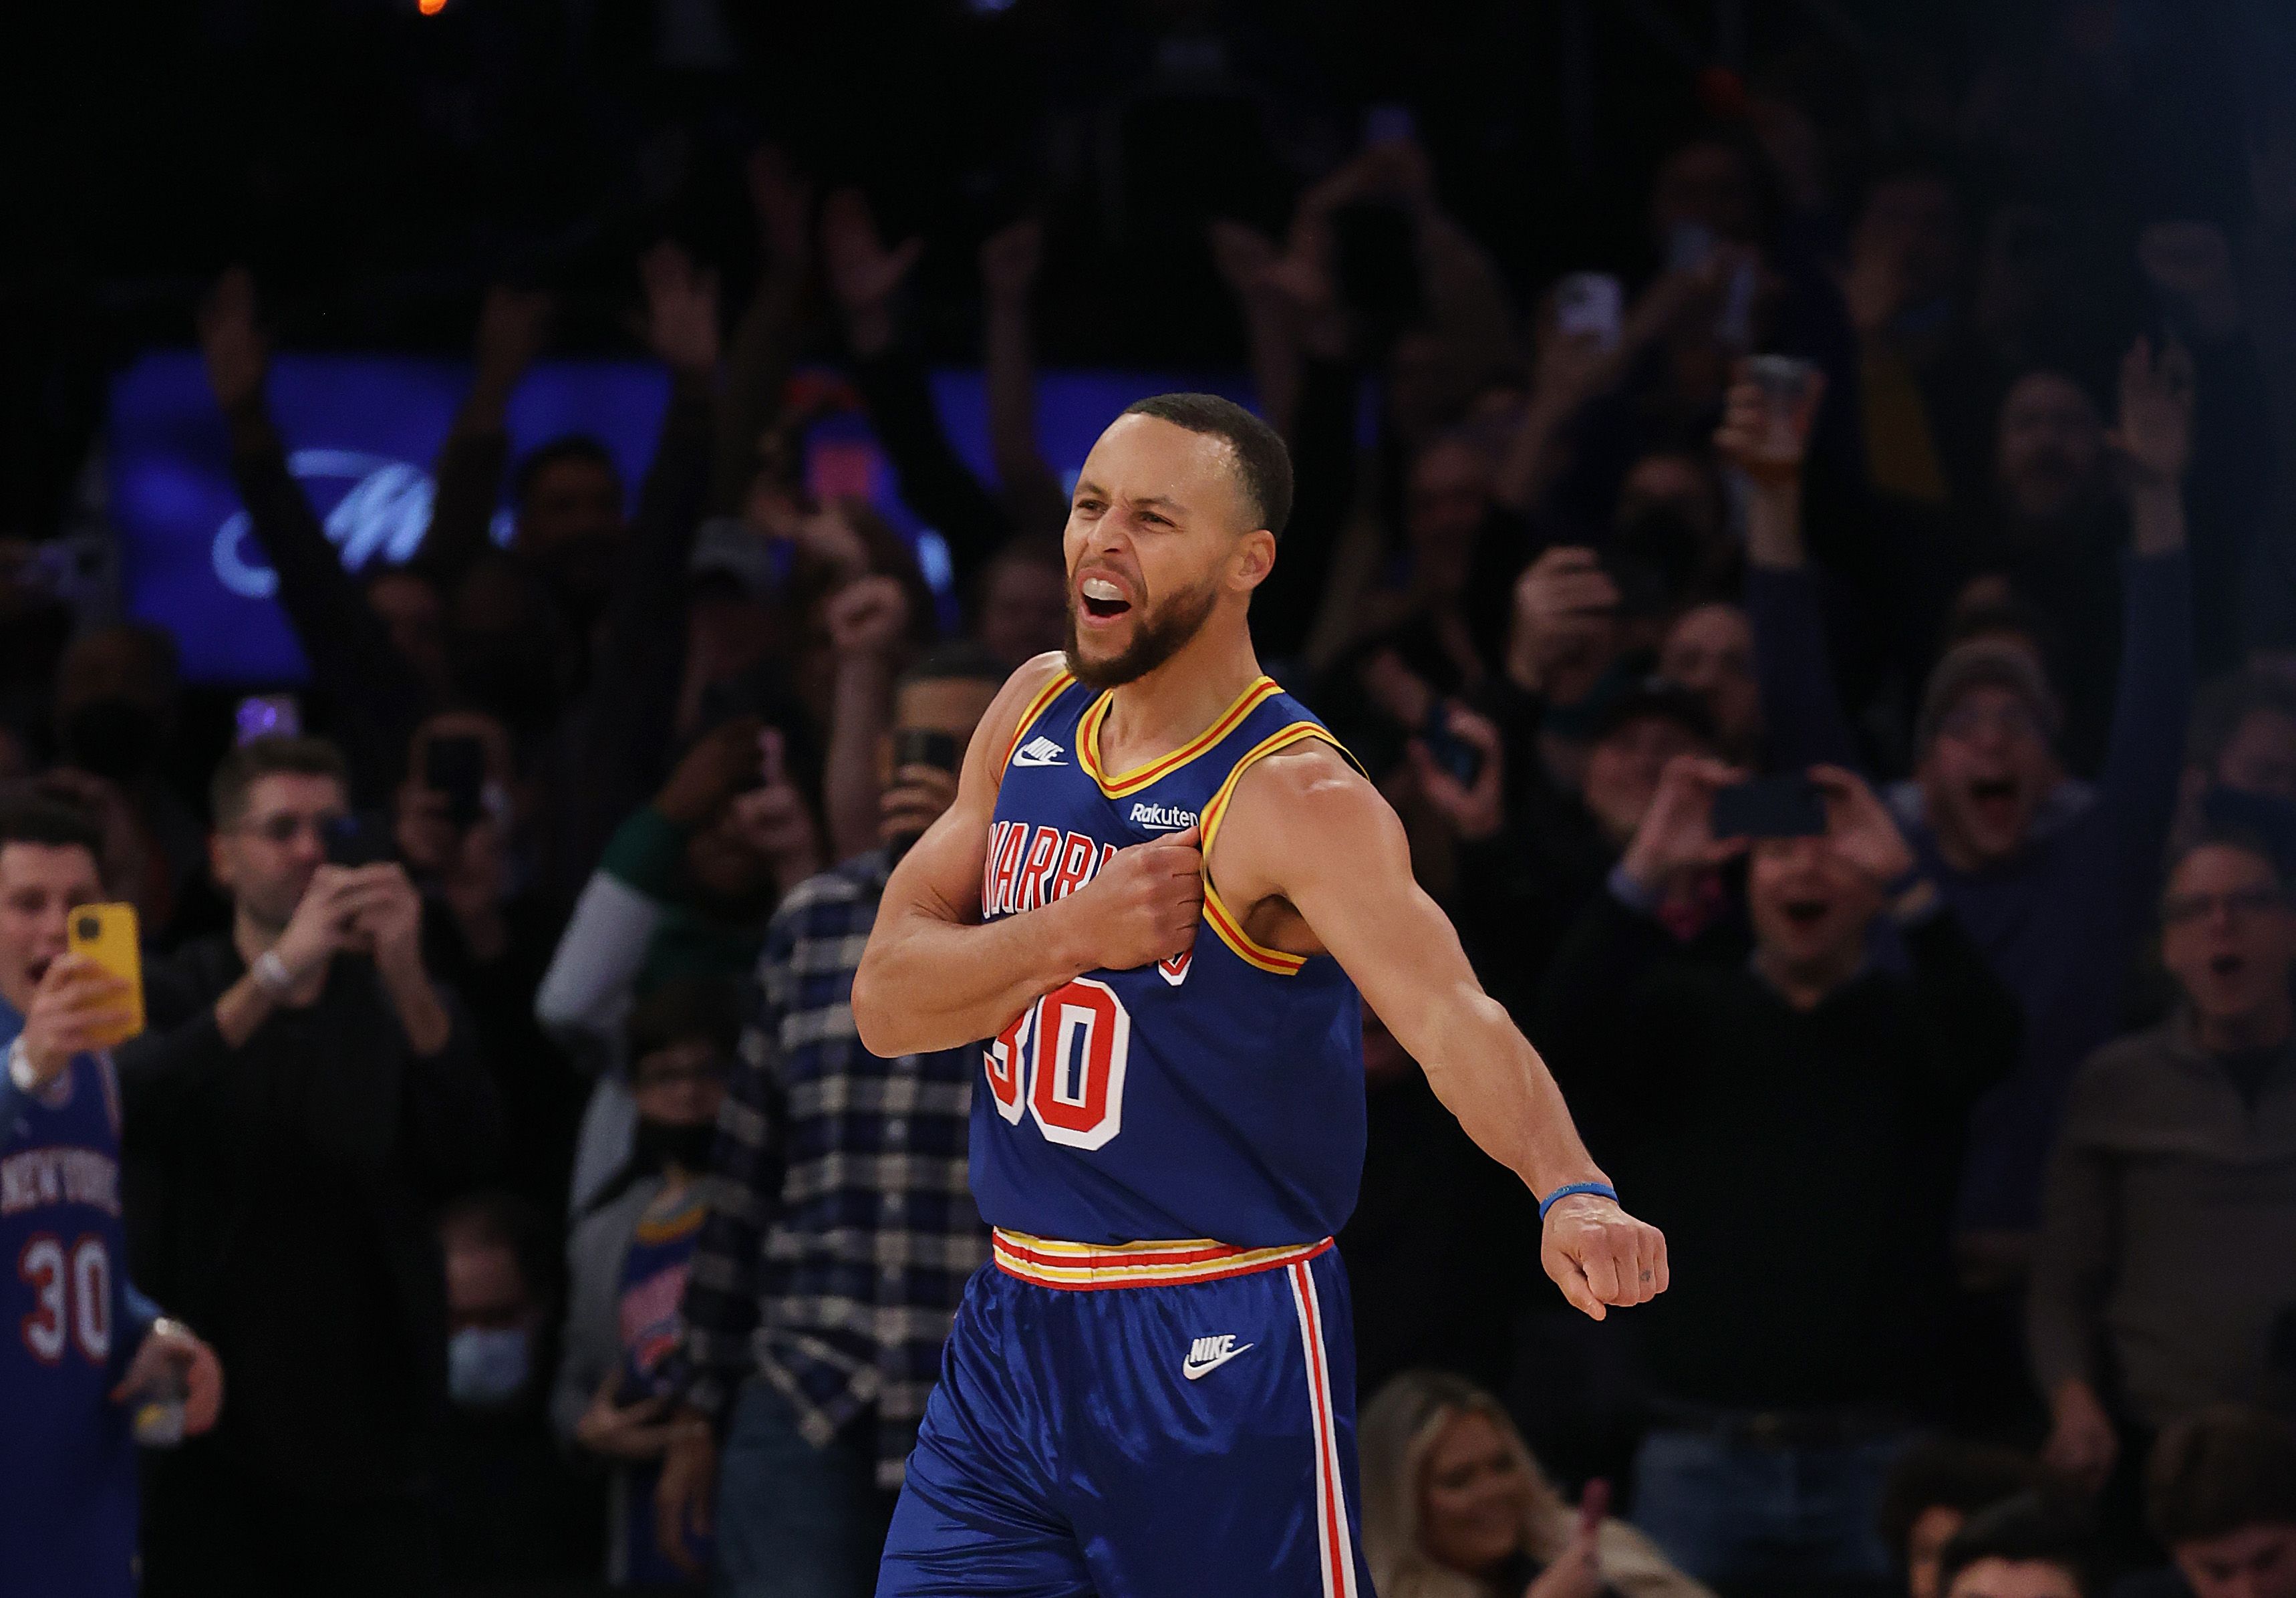 Steph Curry Reacts to Davidson's Big Win - Inside the Warriors